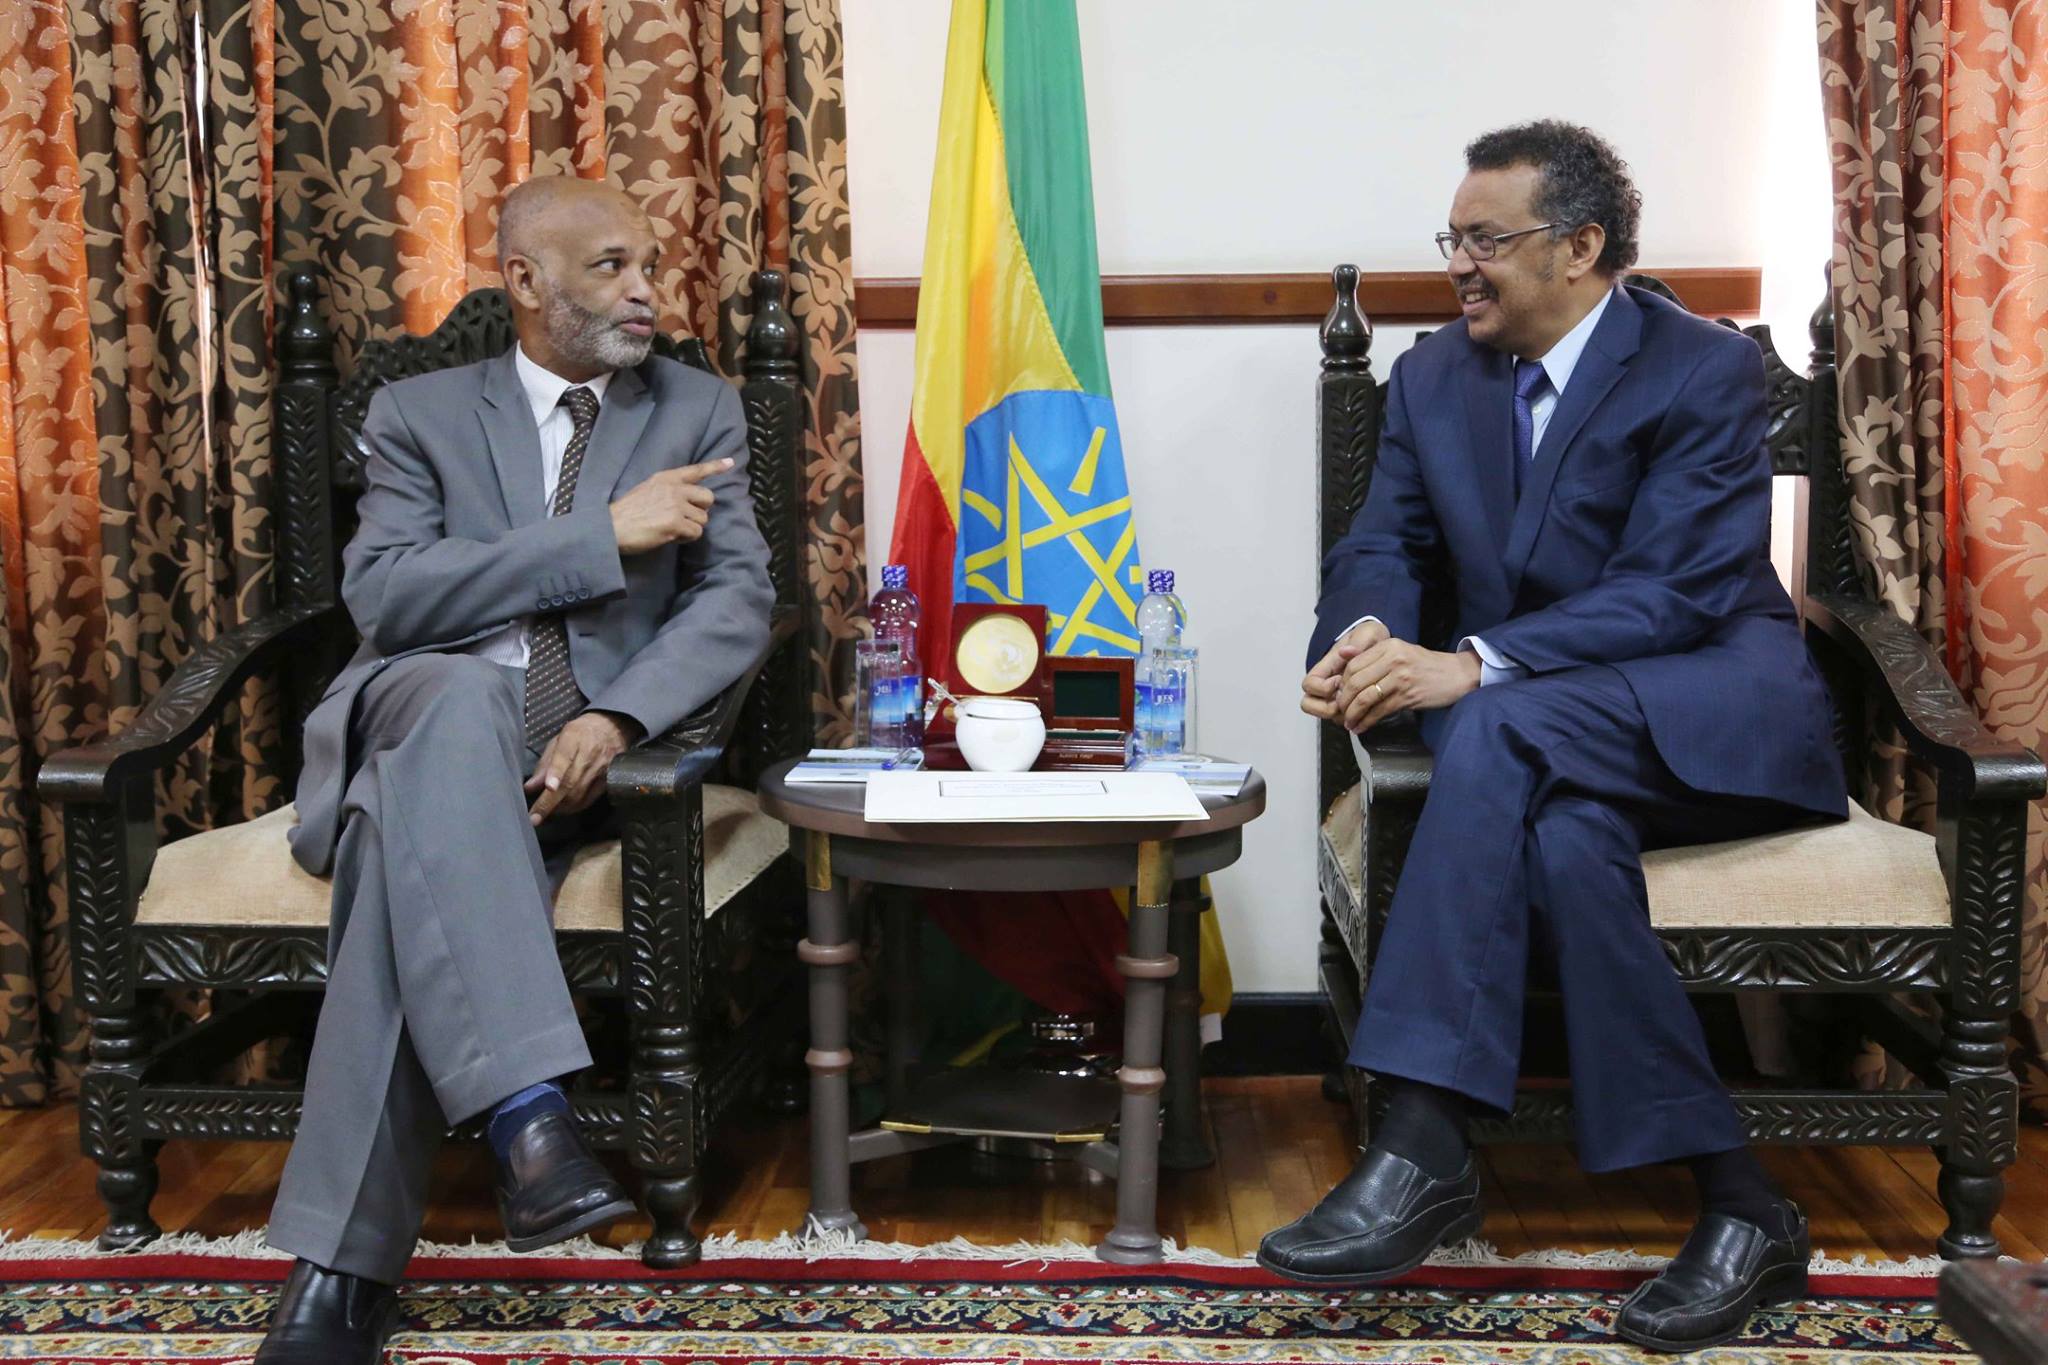 Dr. Tedros meets with State Minister of Foreign Affairs of Sudan.